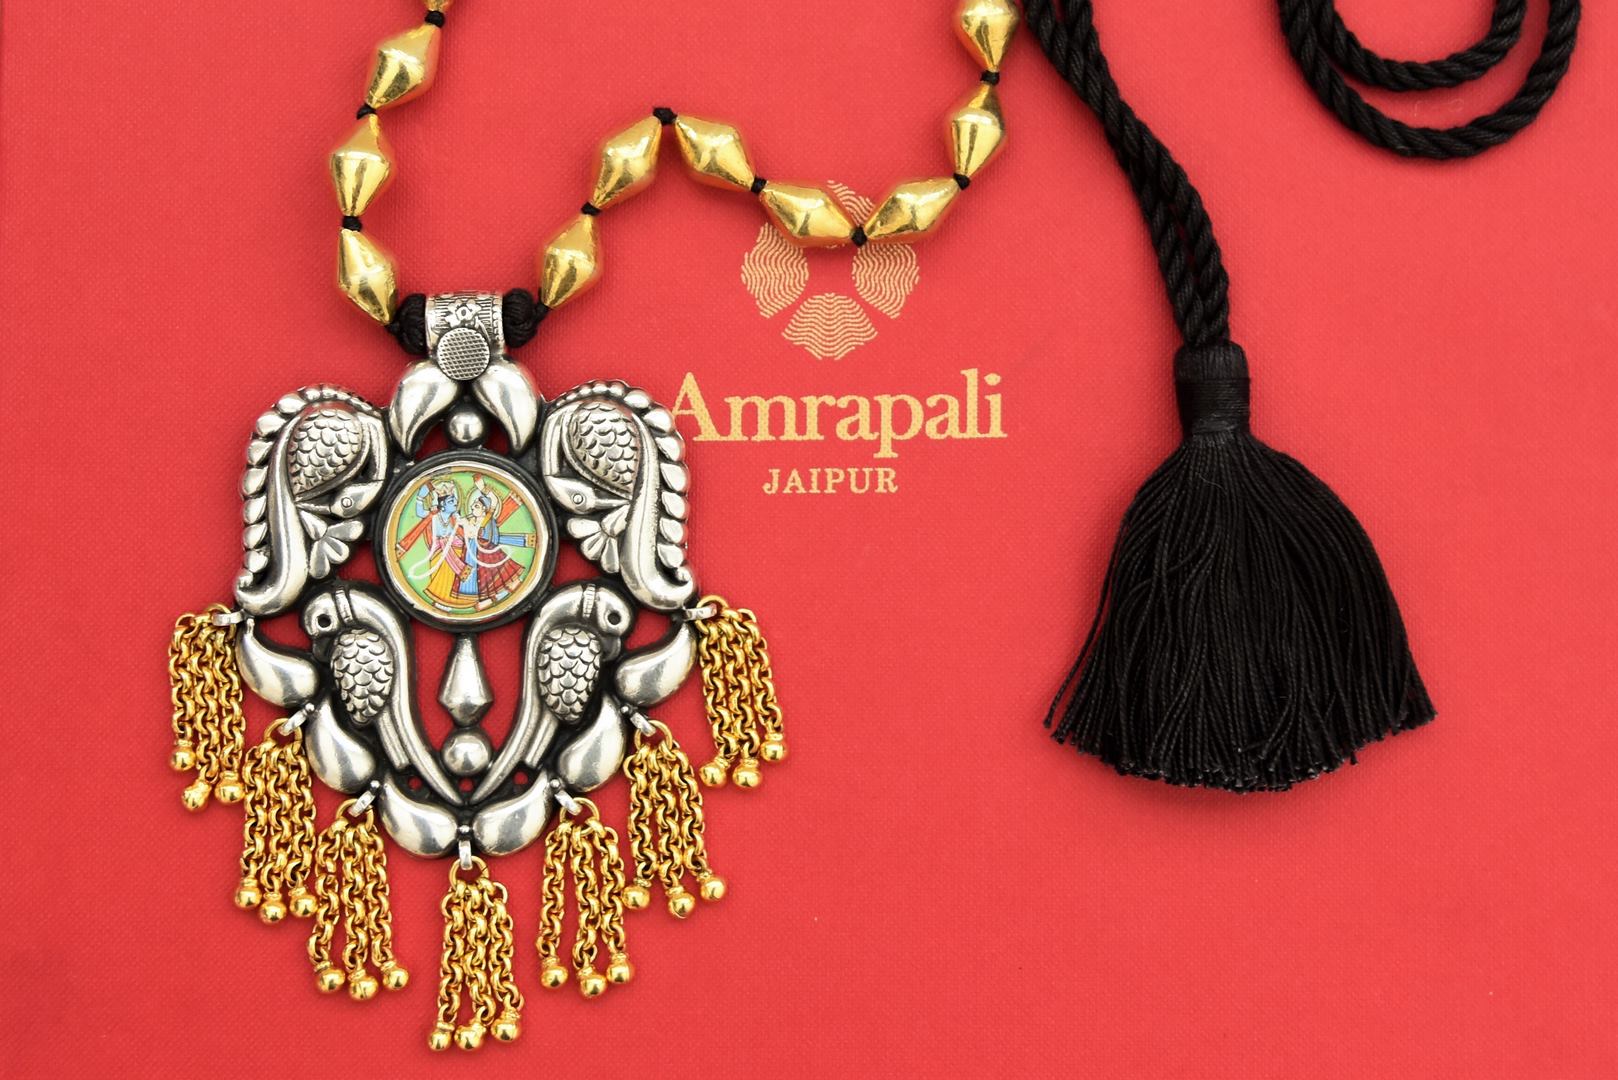 Buy stunning silver gold plated dholki necklace online in USA with Radha Krishna pendant. Shop beautiful Amrapali jewelry, silver jewelry, gold plated jewelry, silver choker necklaces, gold plated necklace in USA from Pure Elegance Indian fashion store in USA.-full view